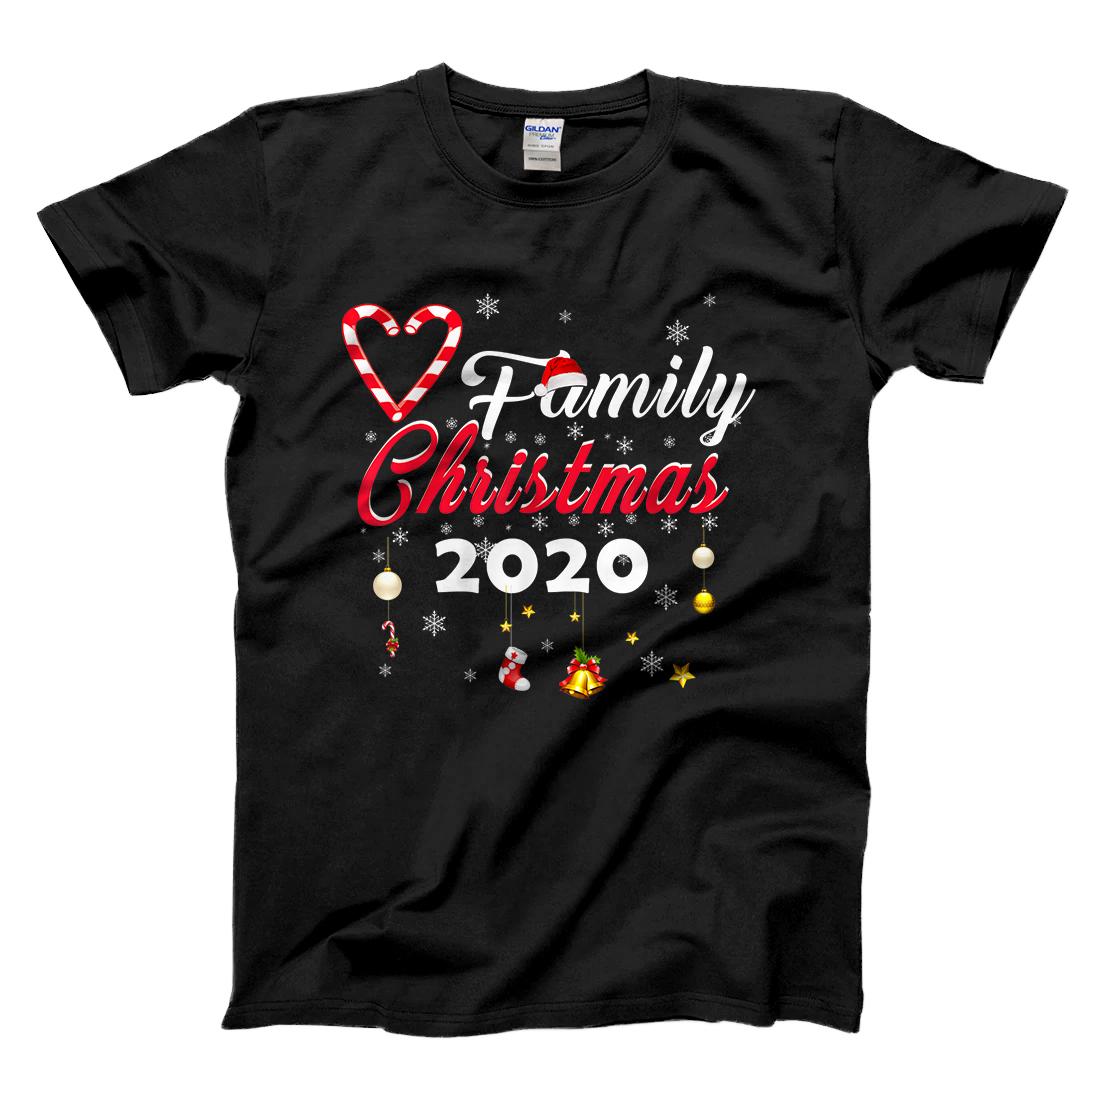 Personalized I Love My Family Cute Family Christmas 2020 T-Shirt